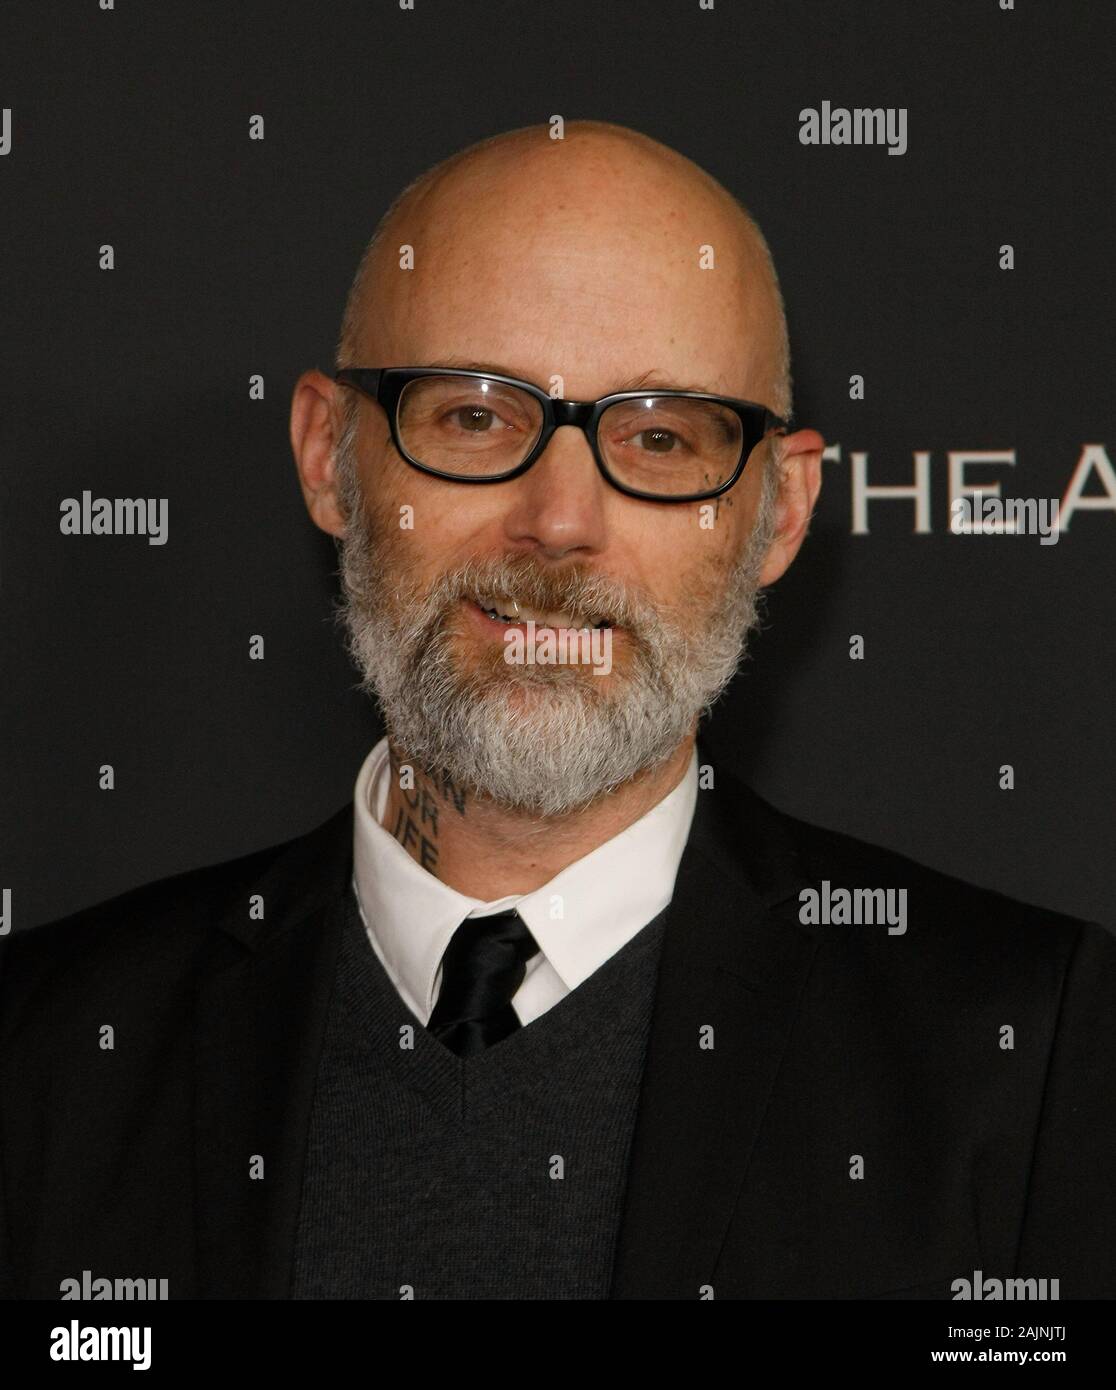 Hollywood, USA. 04th Jan, 2020. LOS ANGELES, CALIFORNIA - JANUARY 04: Moby attends The Art Of Elysium's 13th Annual Celebration - Heaven at Hollywood Palladium on January 04, 2020 in Los Angeles, California. Photo: CraSH/imageSPACE Credit: Imagespace/Alamy Live News Stock Photo